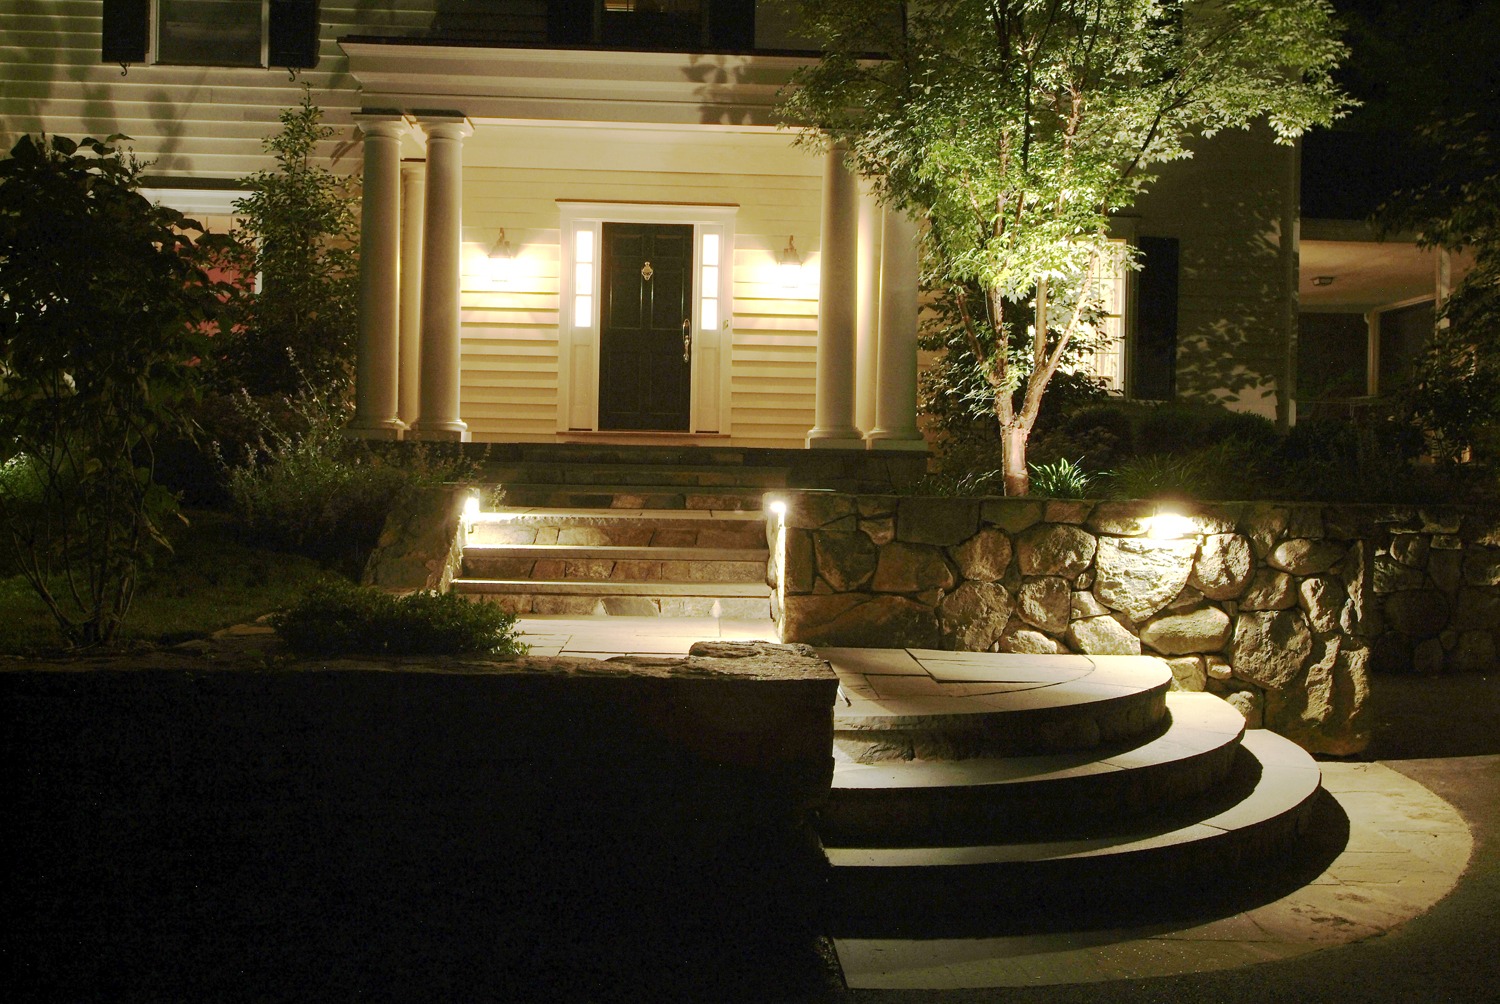 This image shows a house entryway at night with illuminated steps, classical pillars, a front door, landscaping, and exterior lights.